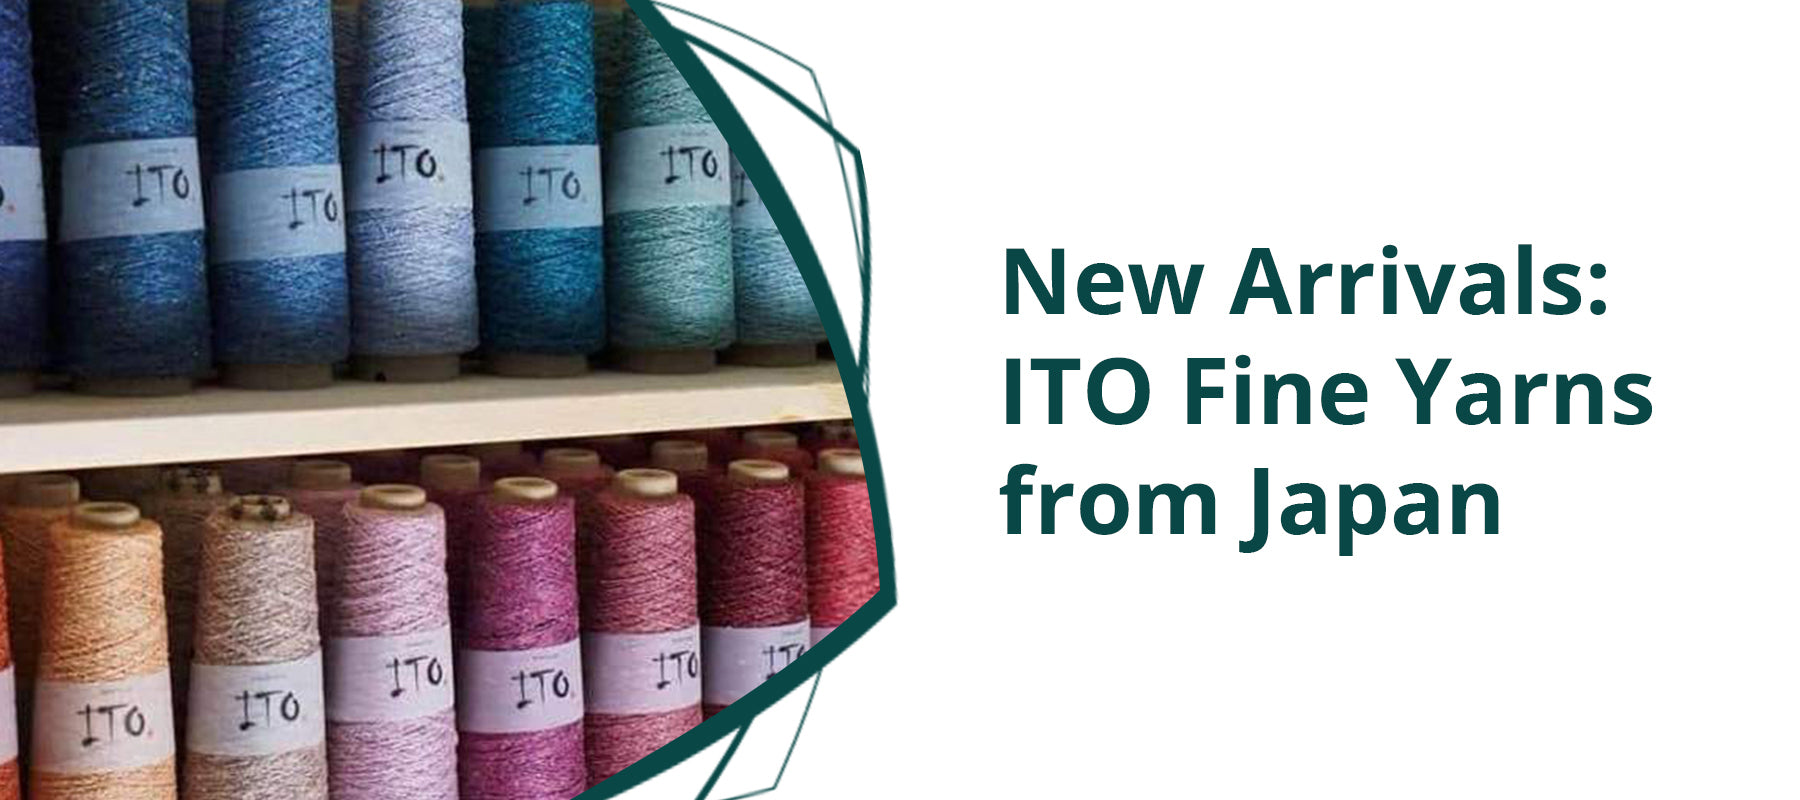 ITO fine yarns from Japan have arrived